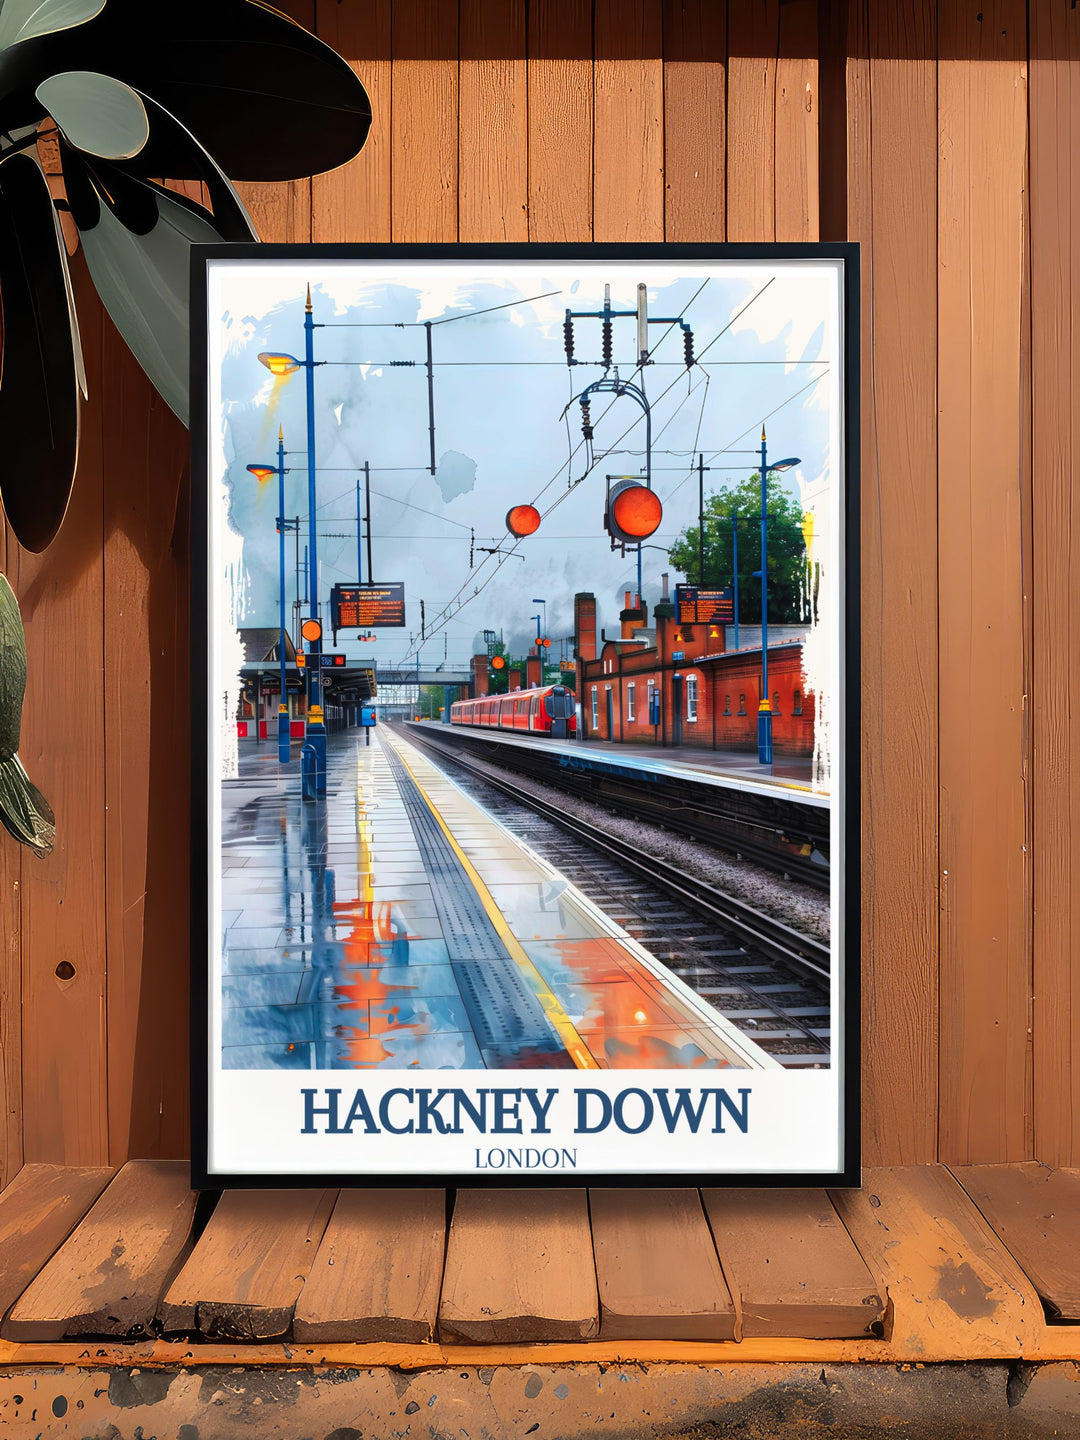 Highlighting the vibrant community life around Hackney Downs Station, this travel poster captures the dynamic spirit and historical significance of this East London area.